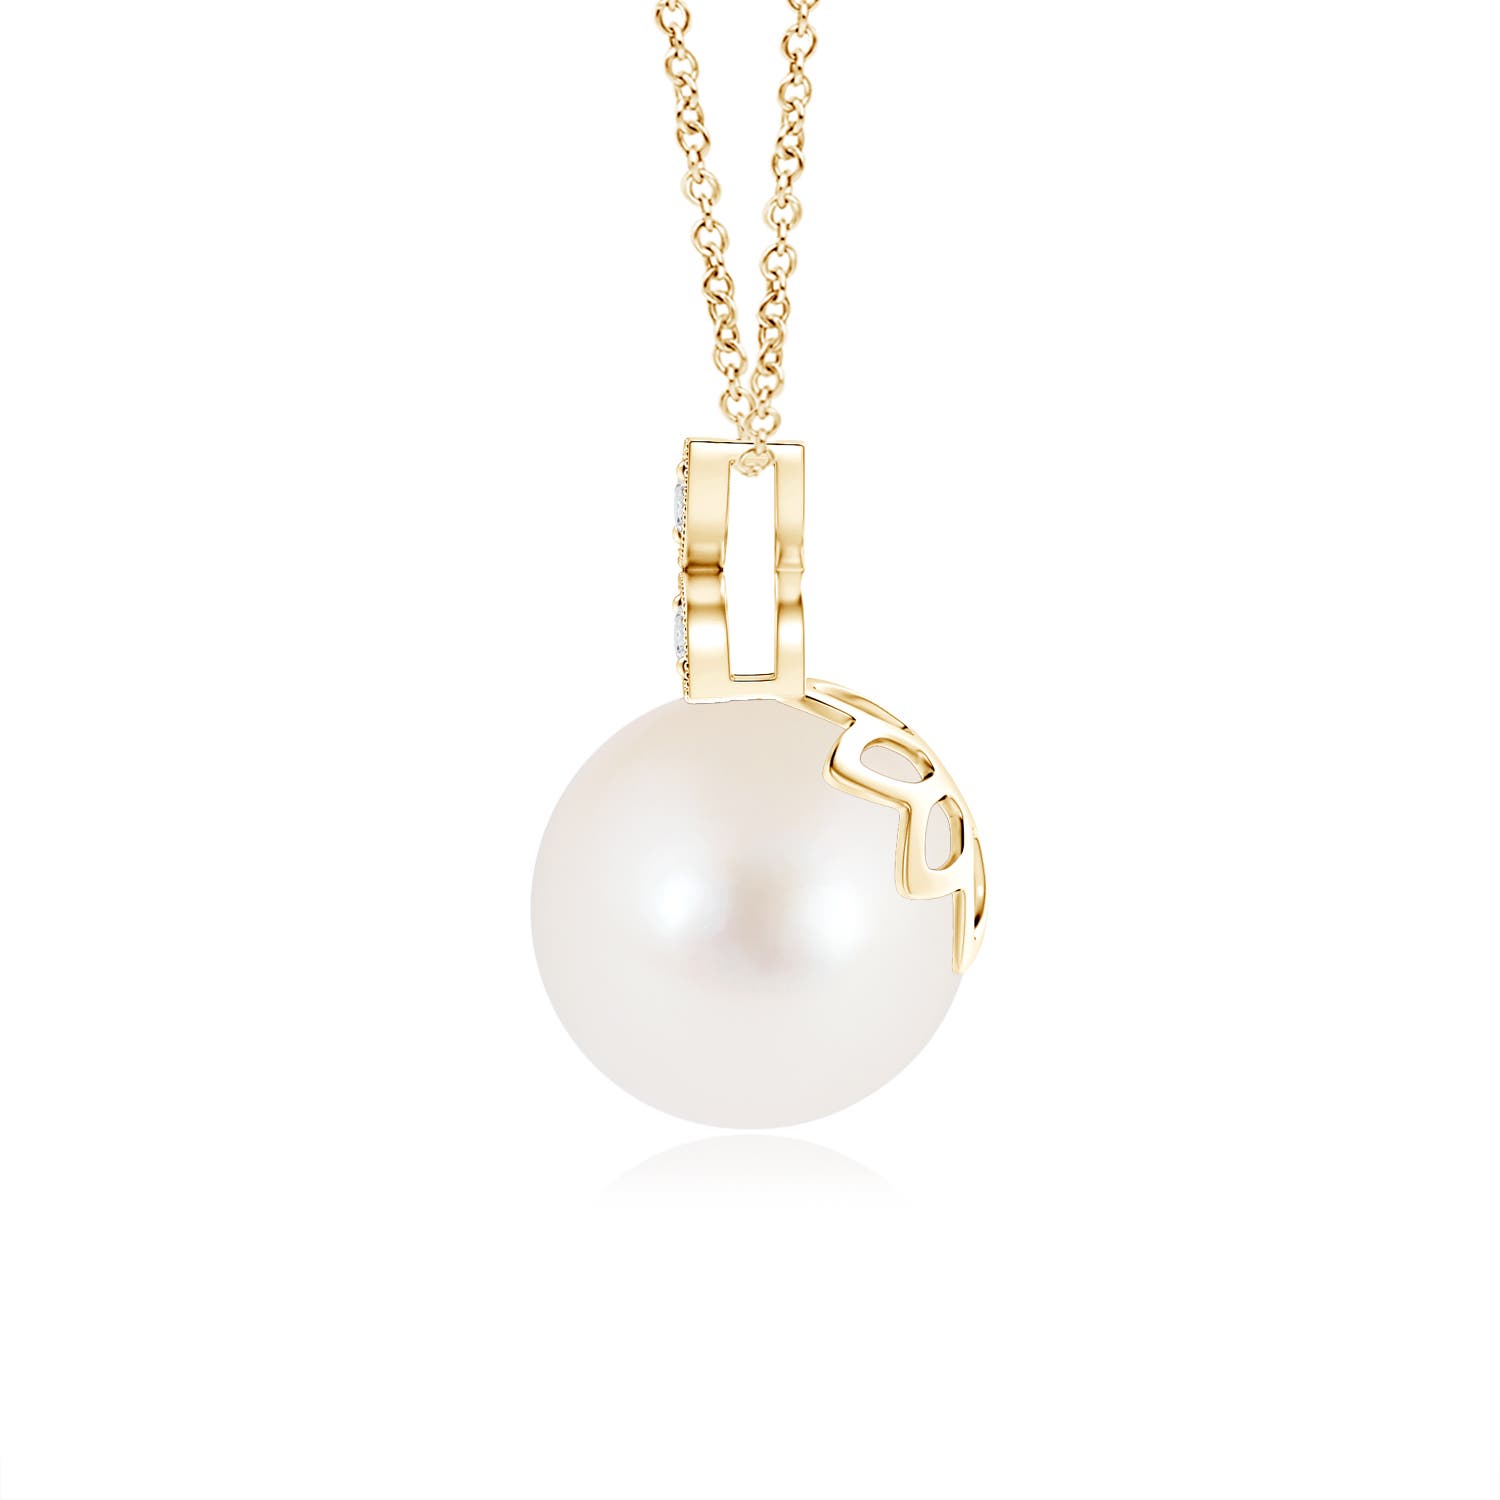 AAA - Freshwater Cultured Pearl / 3.75 CT / 14 KT Yellow Gold